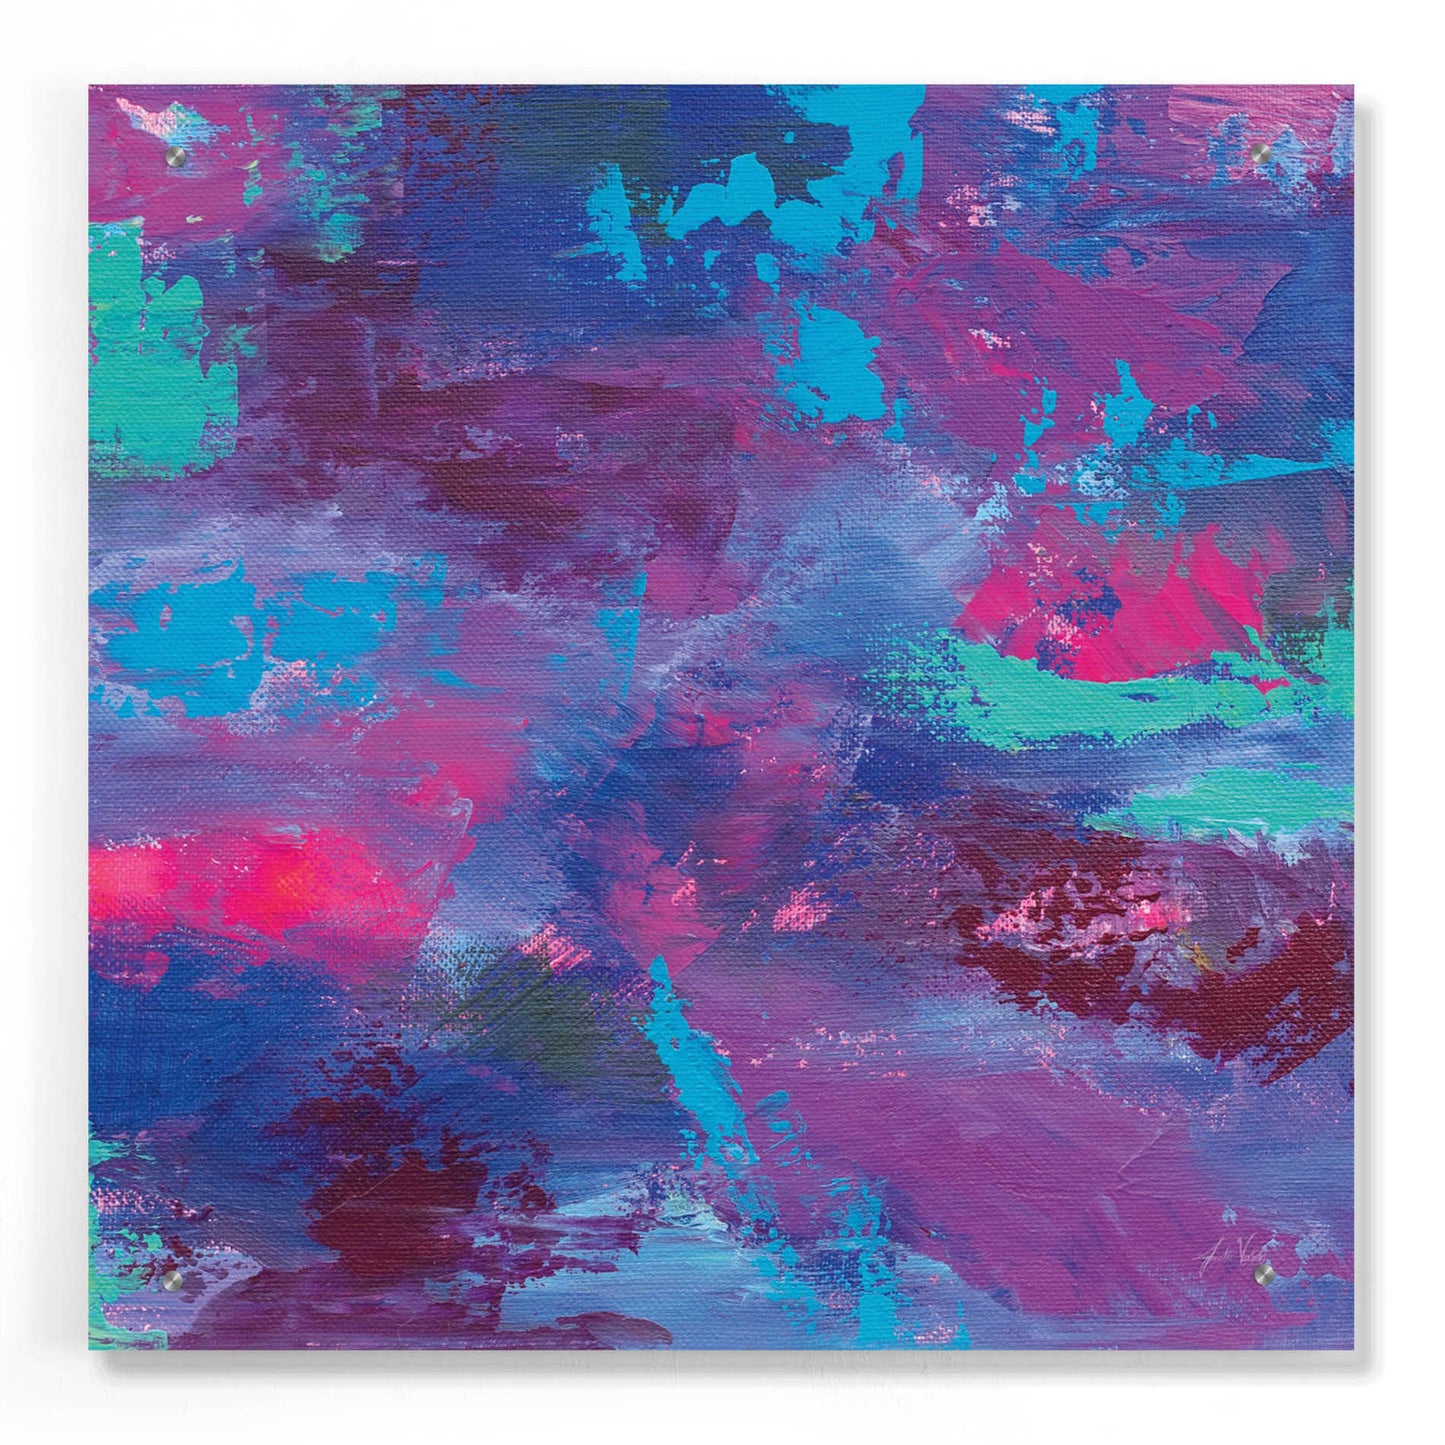 Epic Art 'Delight' by Jeanette Vertentes, Acrylic Glass Wall Art,24x24